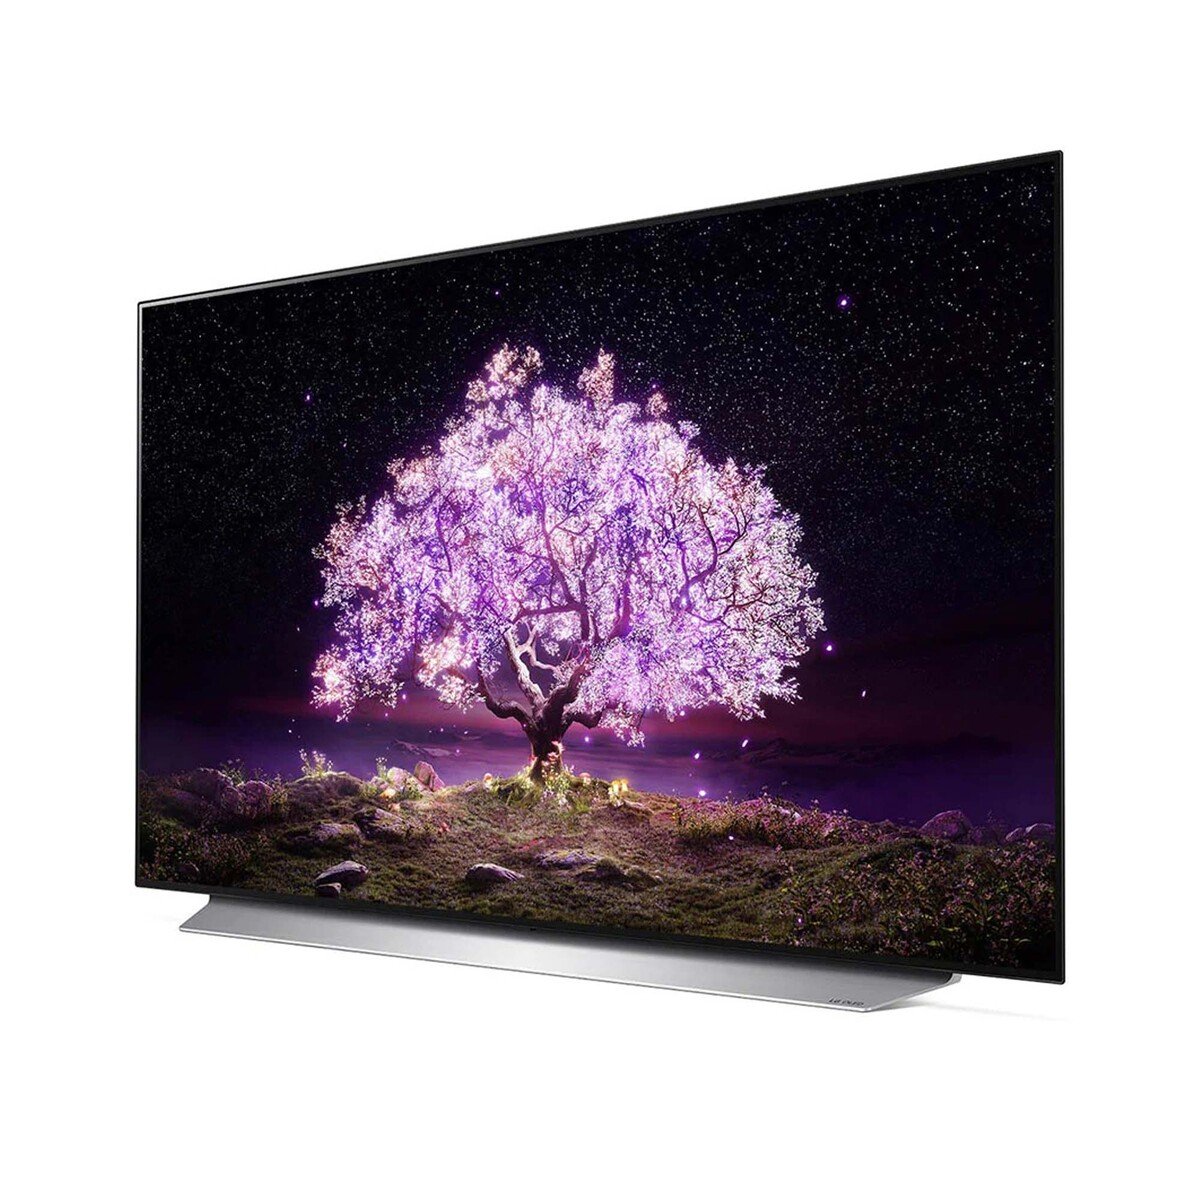 LG OLED TV 55 Inch C1 Series Cinema Screen Design 4K Cinema HDR webOS Smart with ThinQ AI Pixel Dimming